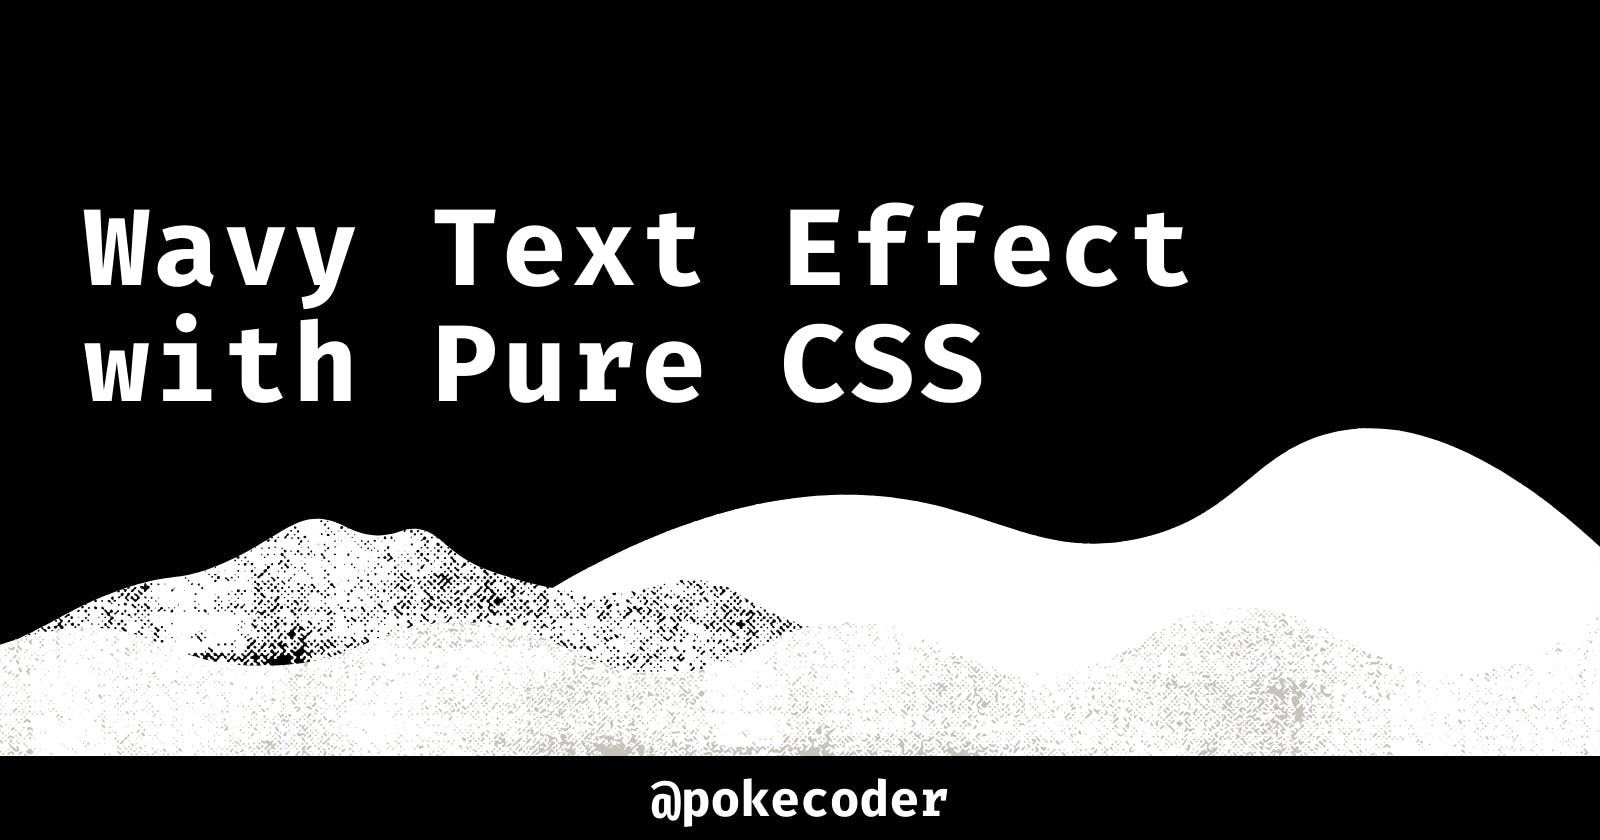 Create a Wavy Text Effect with Pure CSS